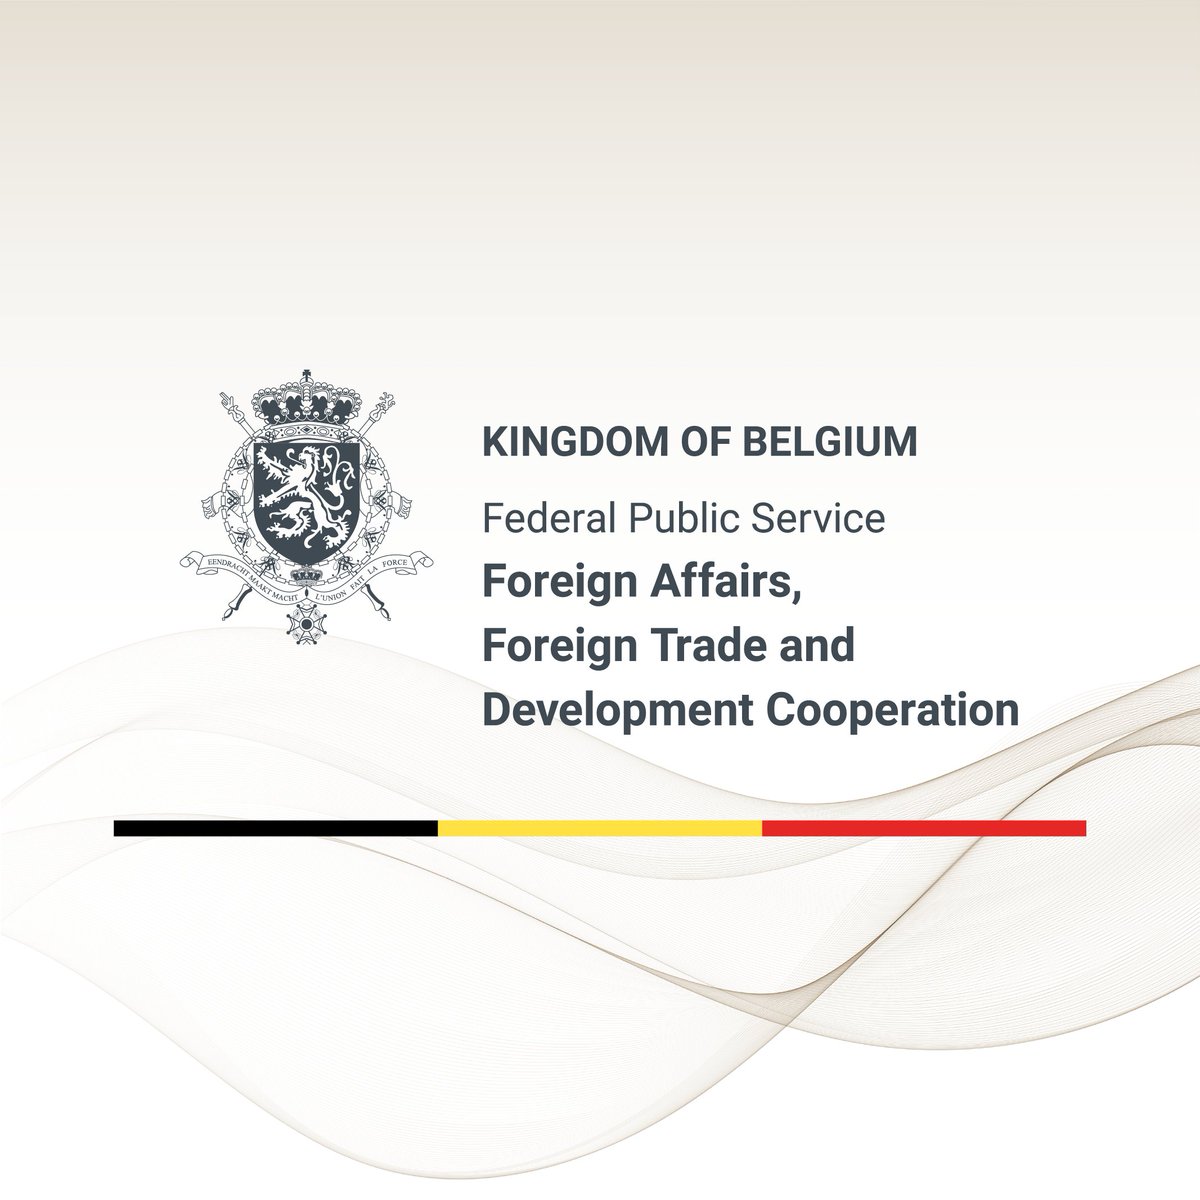 🇧🇪 Belgium welcomes the new round of negotiations between Armenia & Azerbaijan on 10 & 11 May, the recent agreement on the use of the 1991 Alma Ata Declaration as the basis for border delimitation, as well as their efforts to continue discussions with a view to a peace agreement.